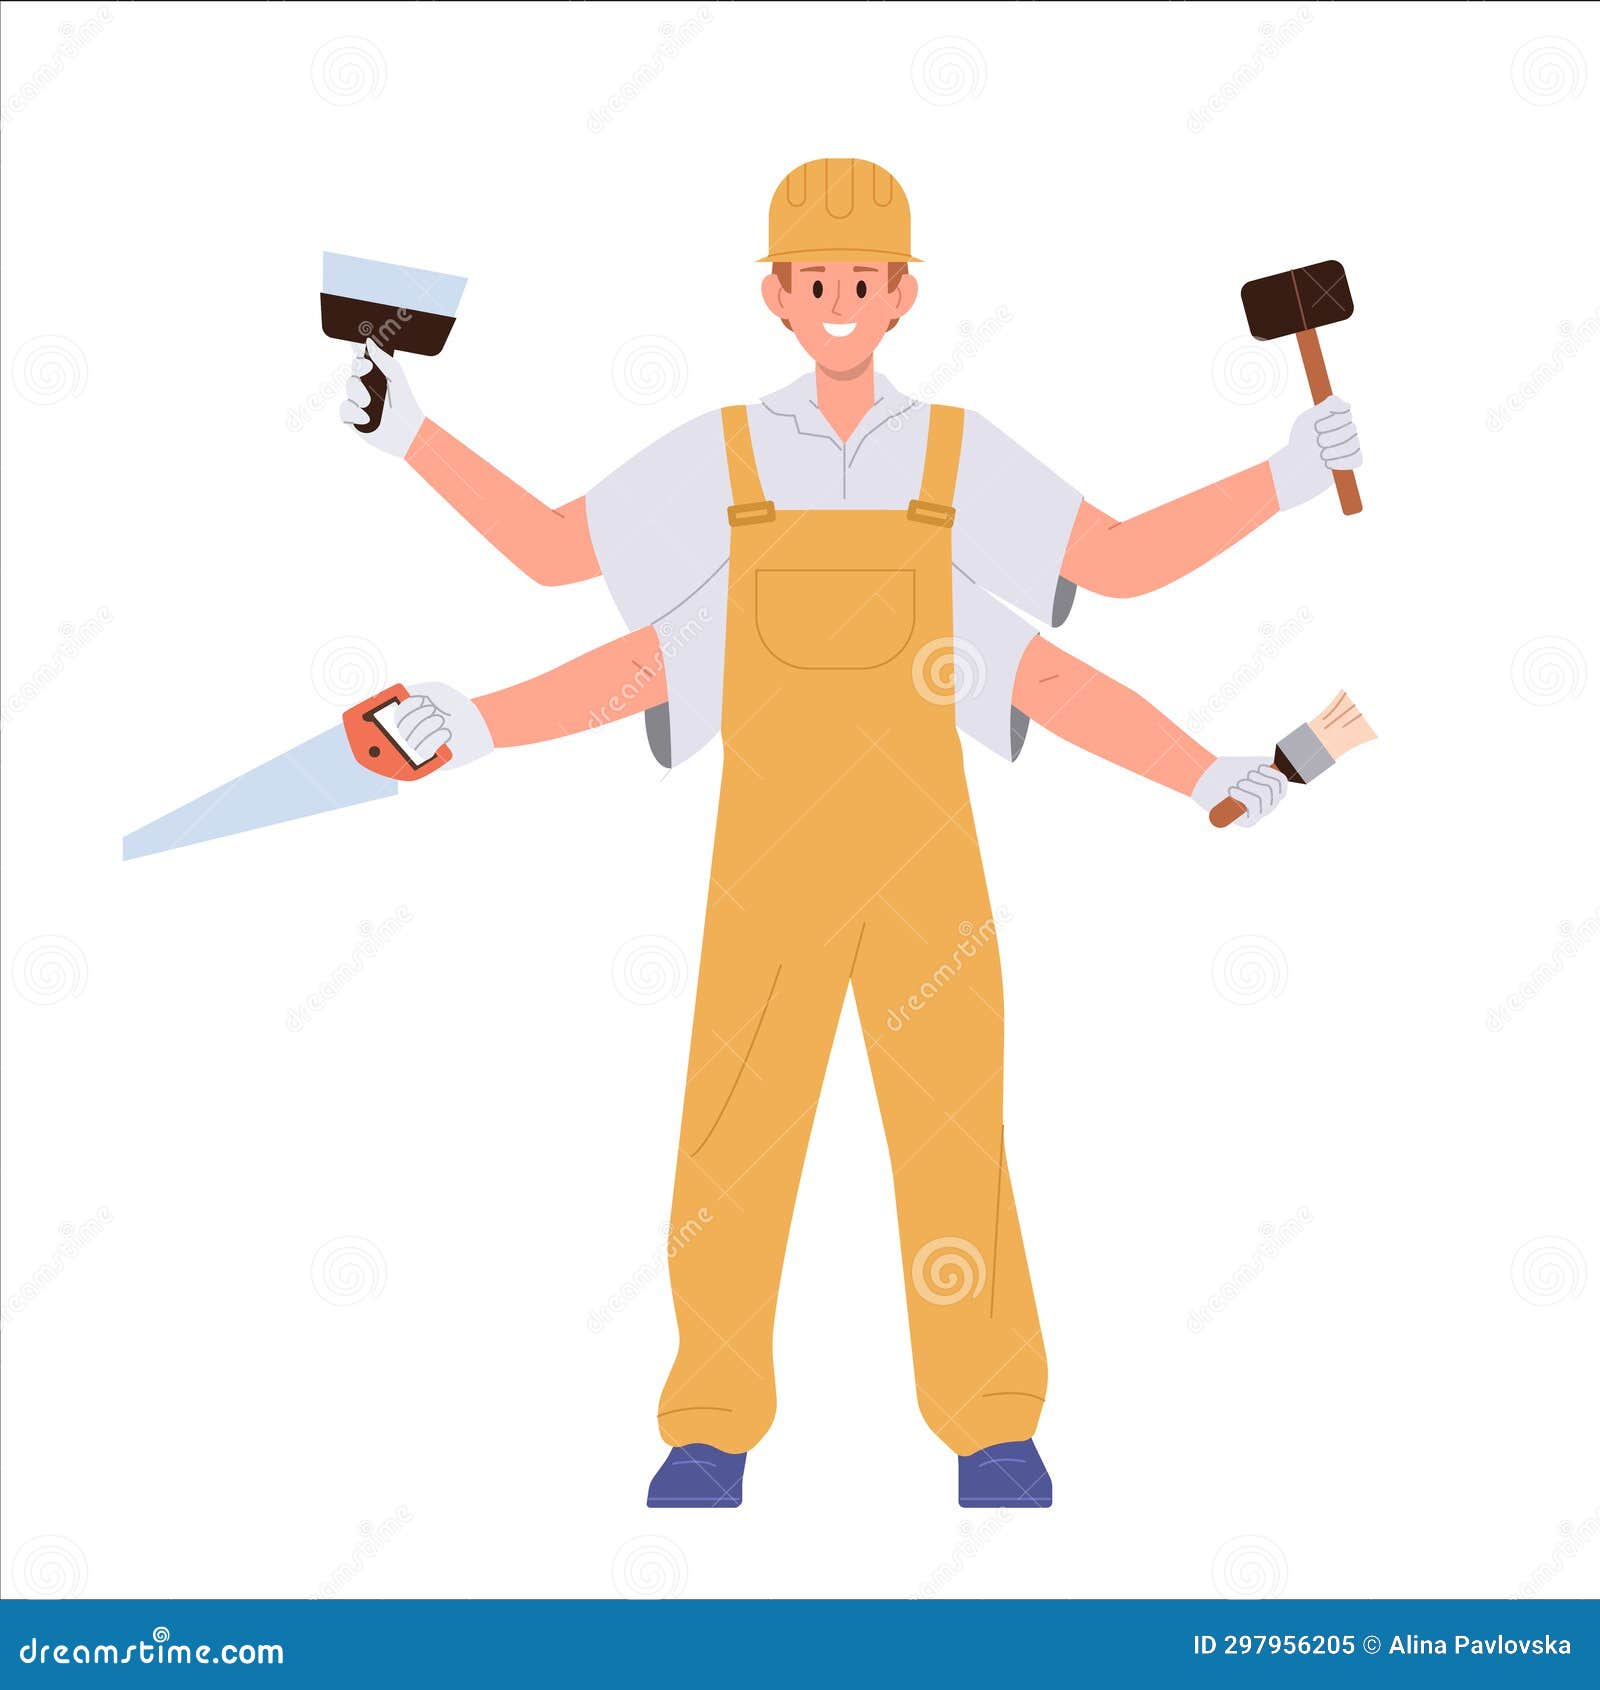 Multitasking Handyman Cartoon Character Having Lots of Arms with ...